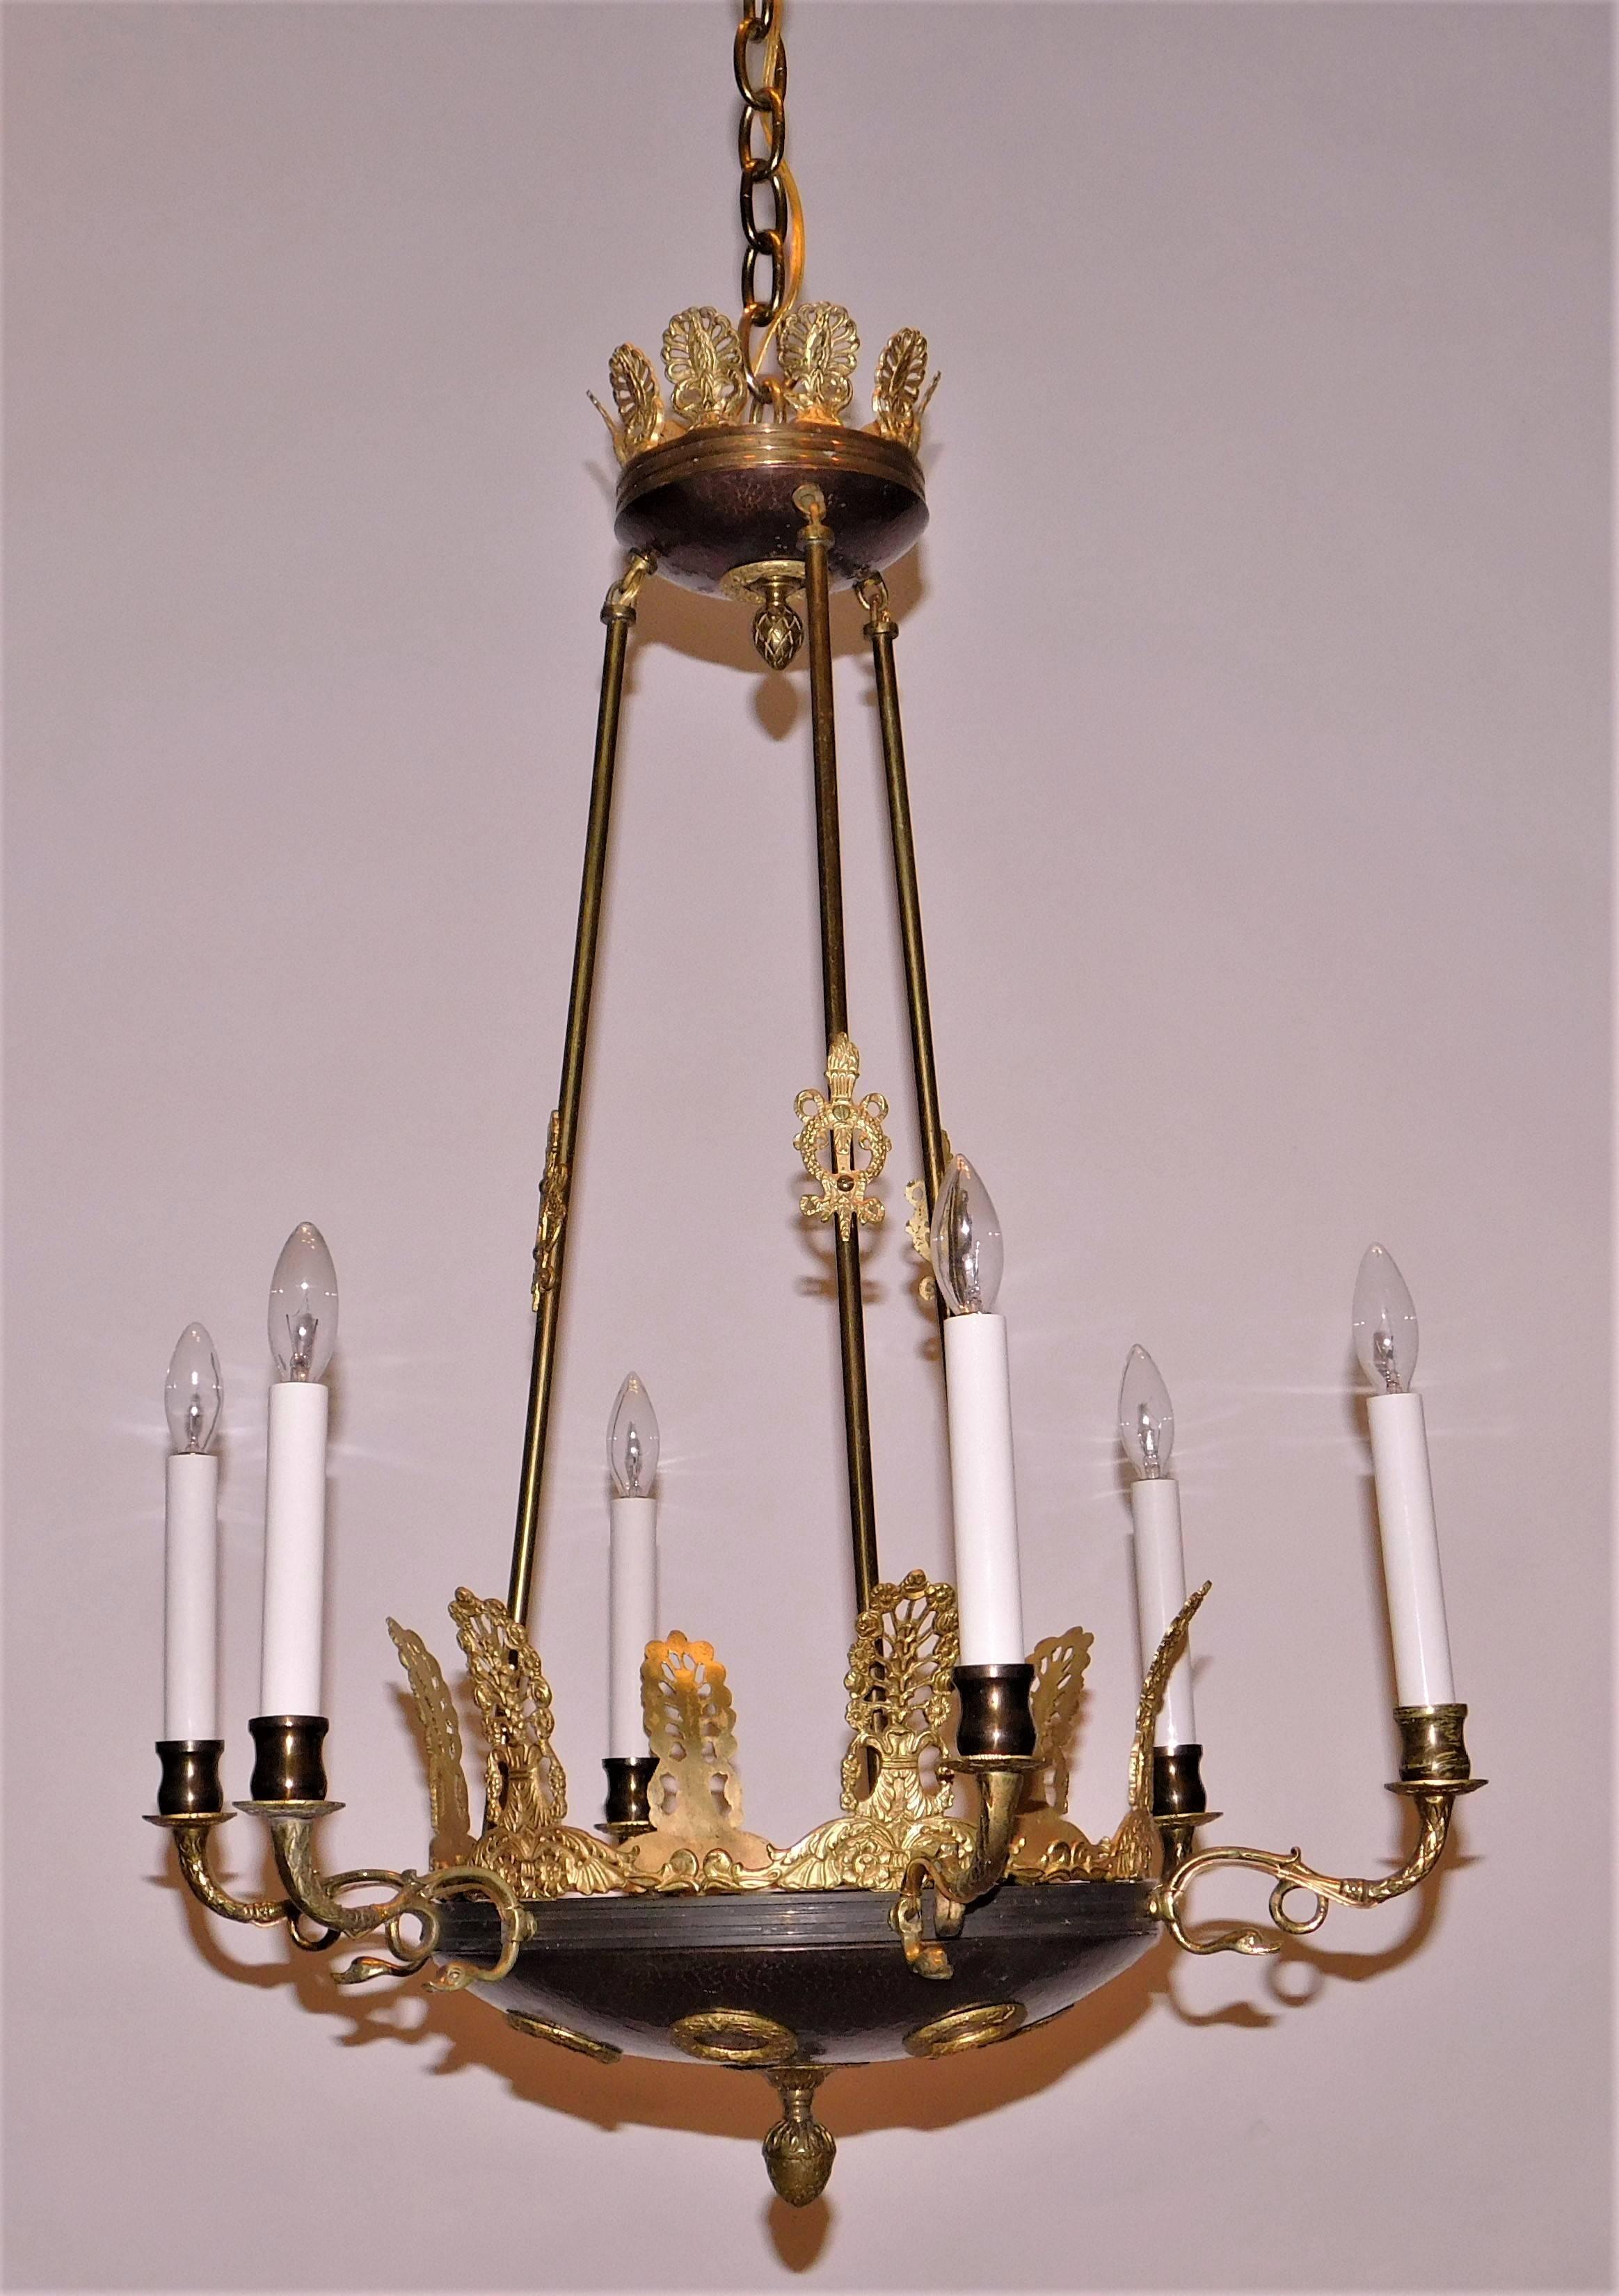 Hand made of bronze, beaten bronze and gilt bronze. The fixture has anthemions, wreaths and other Empire-related design elements. Ceiling cap, hanging hardware and 1 foot of chain included.